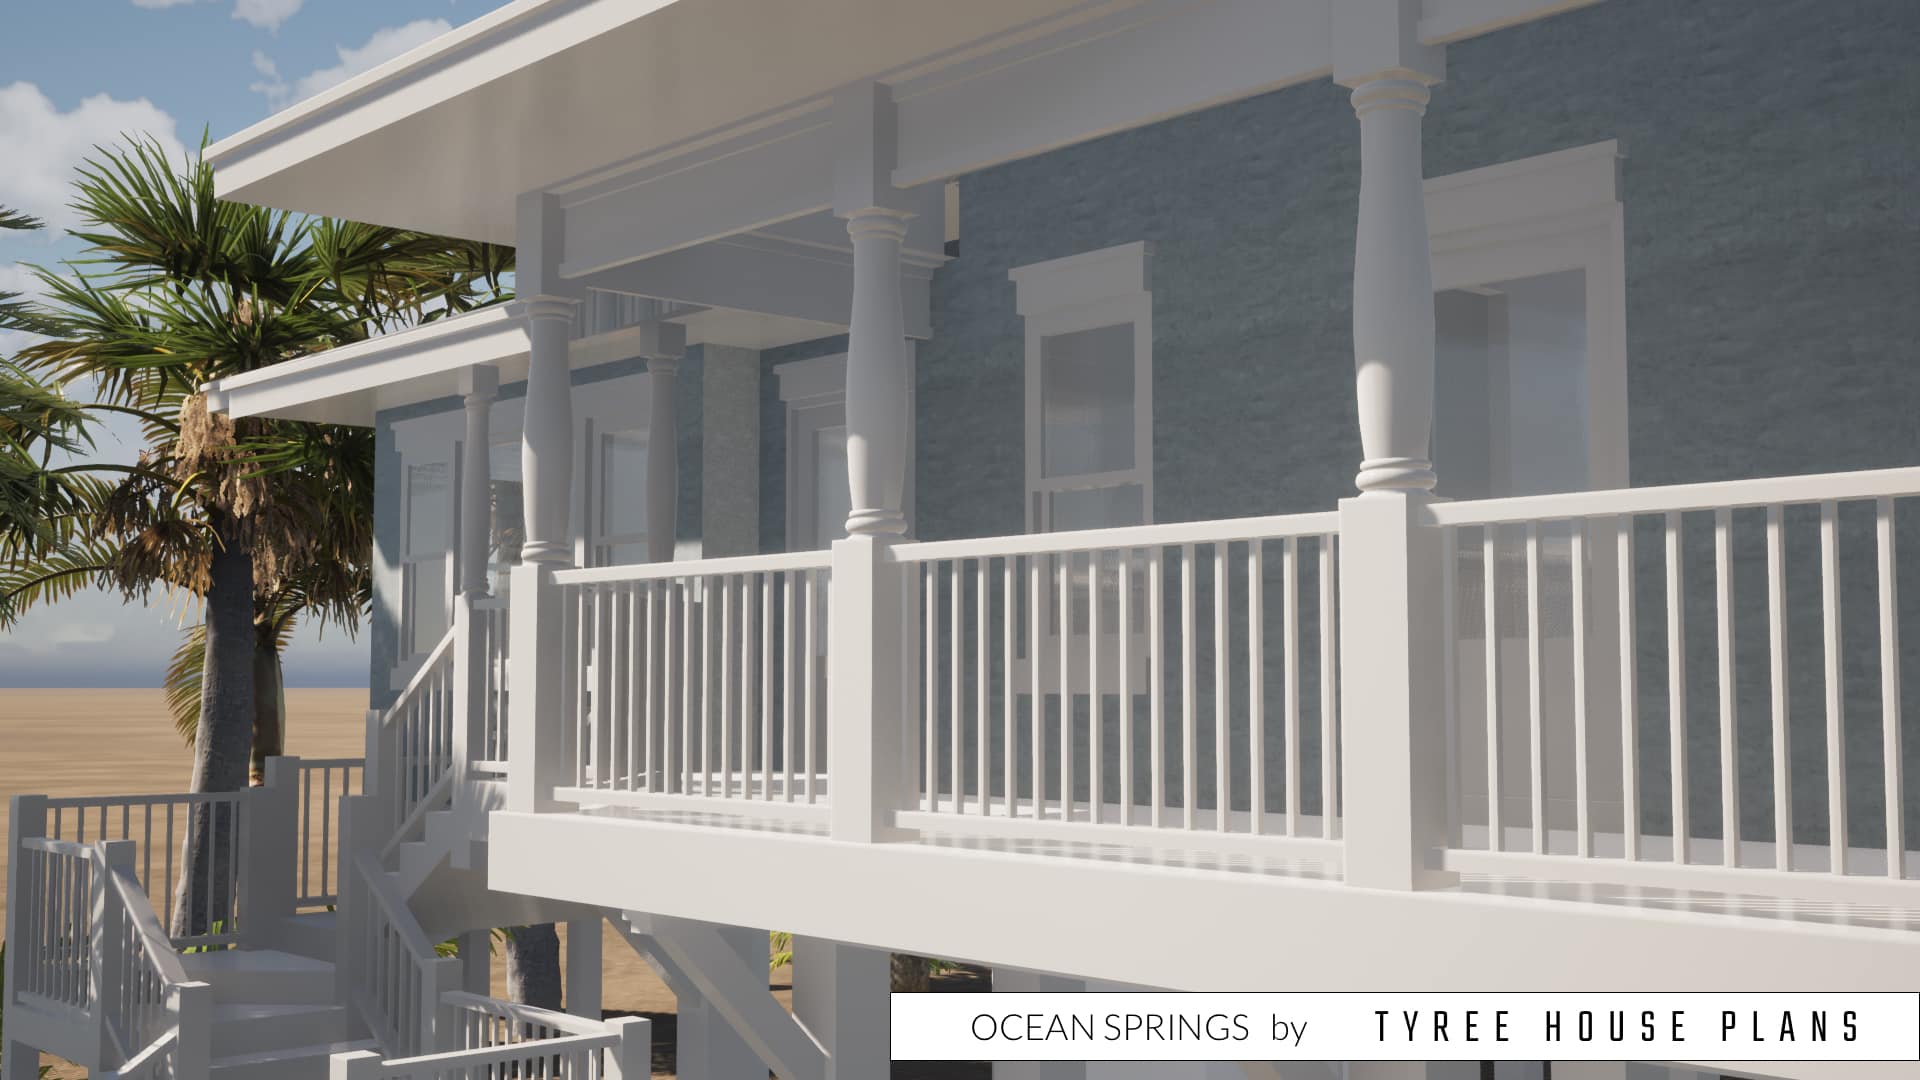 Decorative front porch. Ocean Springs by Tyree House Plans.